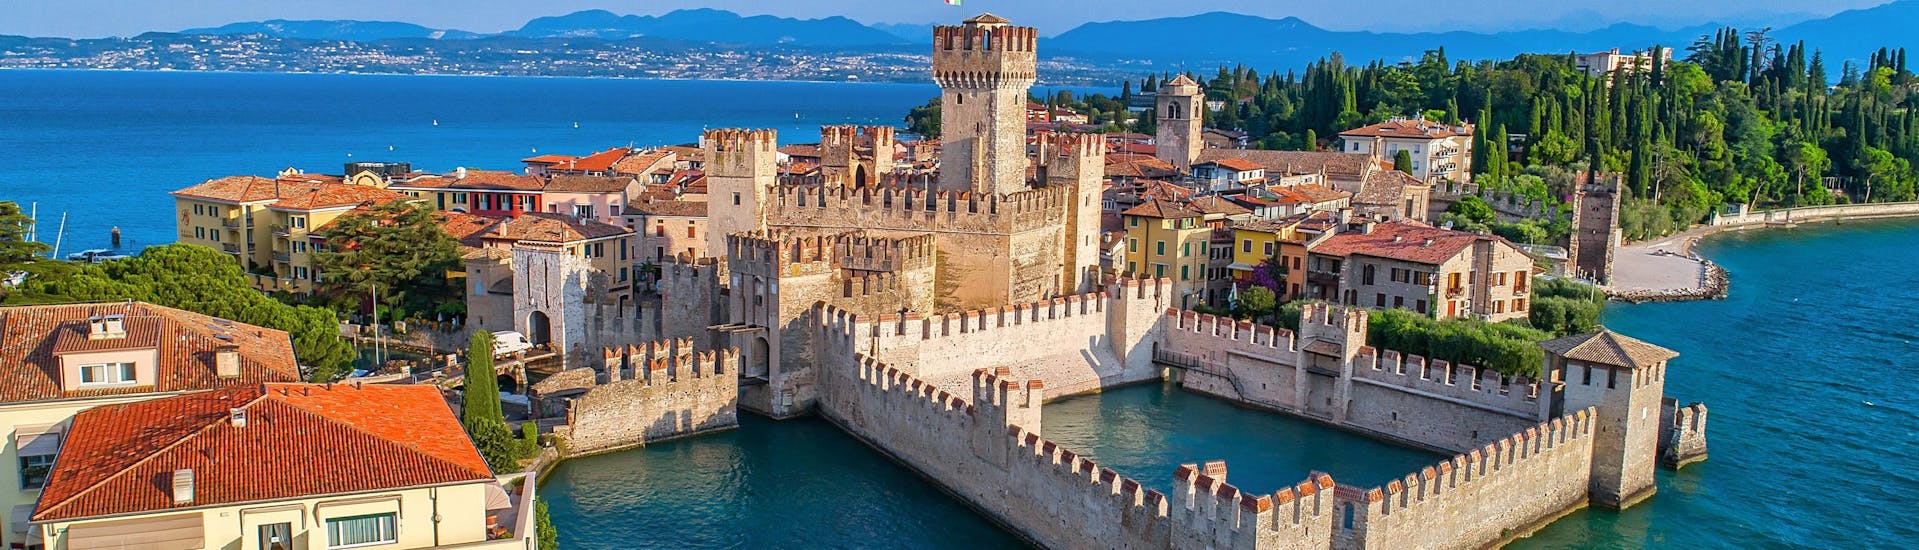 An aerial view of the Scaligero Castle in Sirmione, one of the sights you can see on a boat trip from Desenzano del Garda.